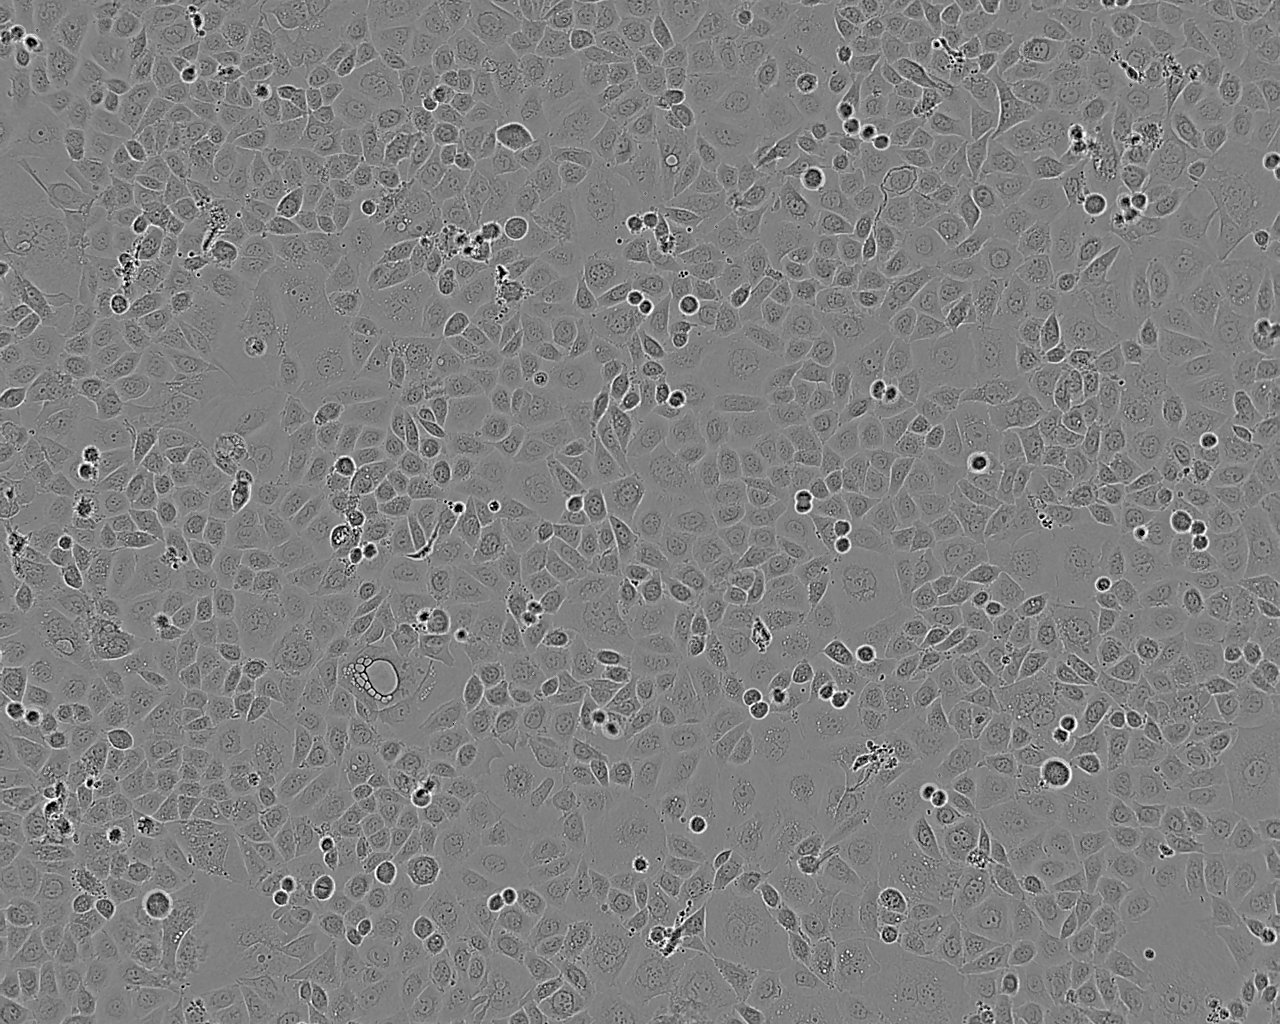 SK-N-AS epithelioid cells人脑神经母细胞瘤细胞系,SK-N-AS epithelioid cells